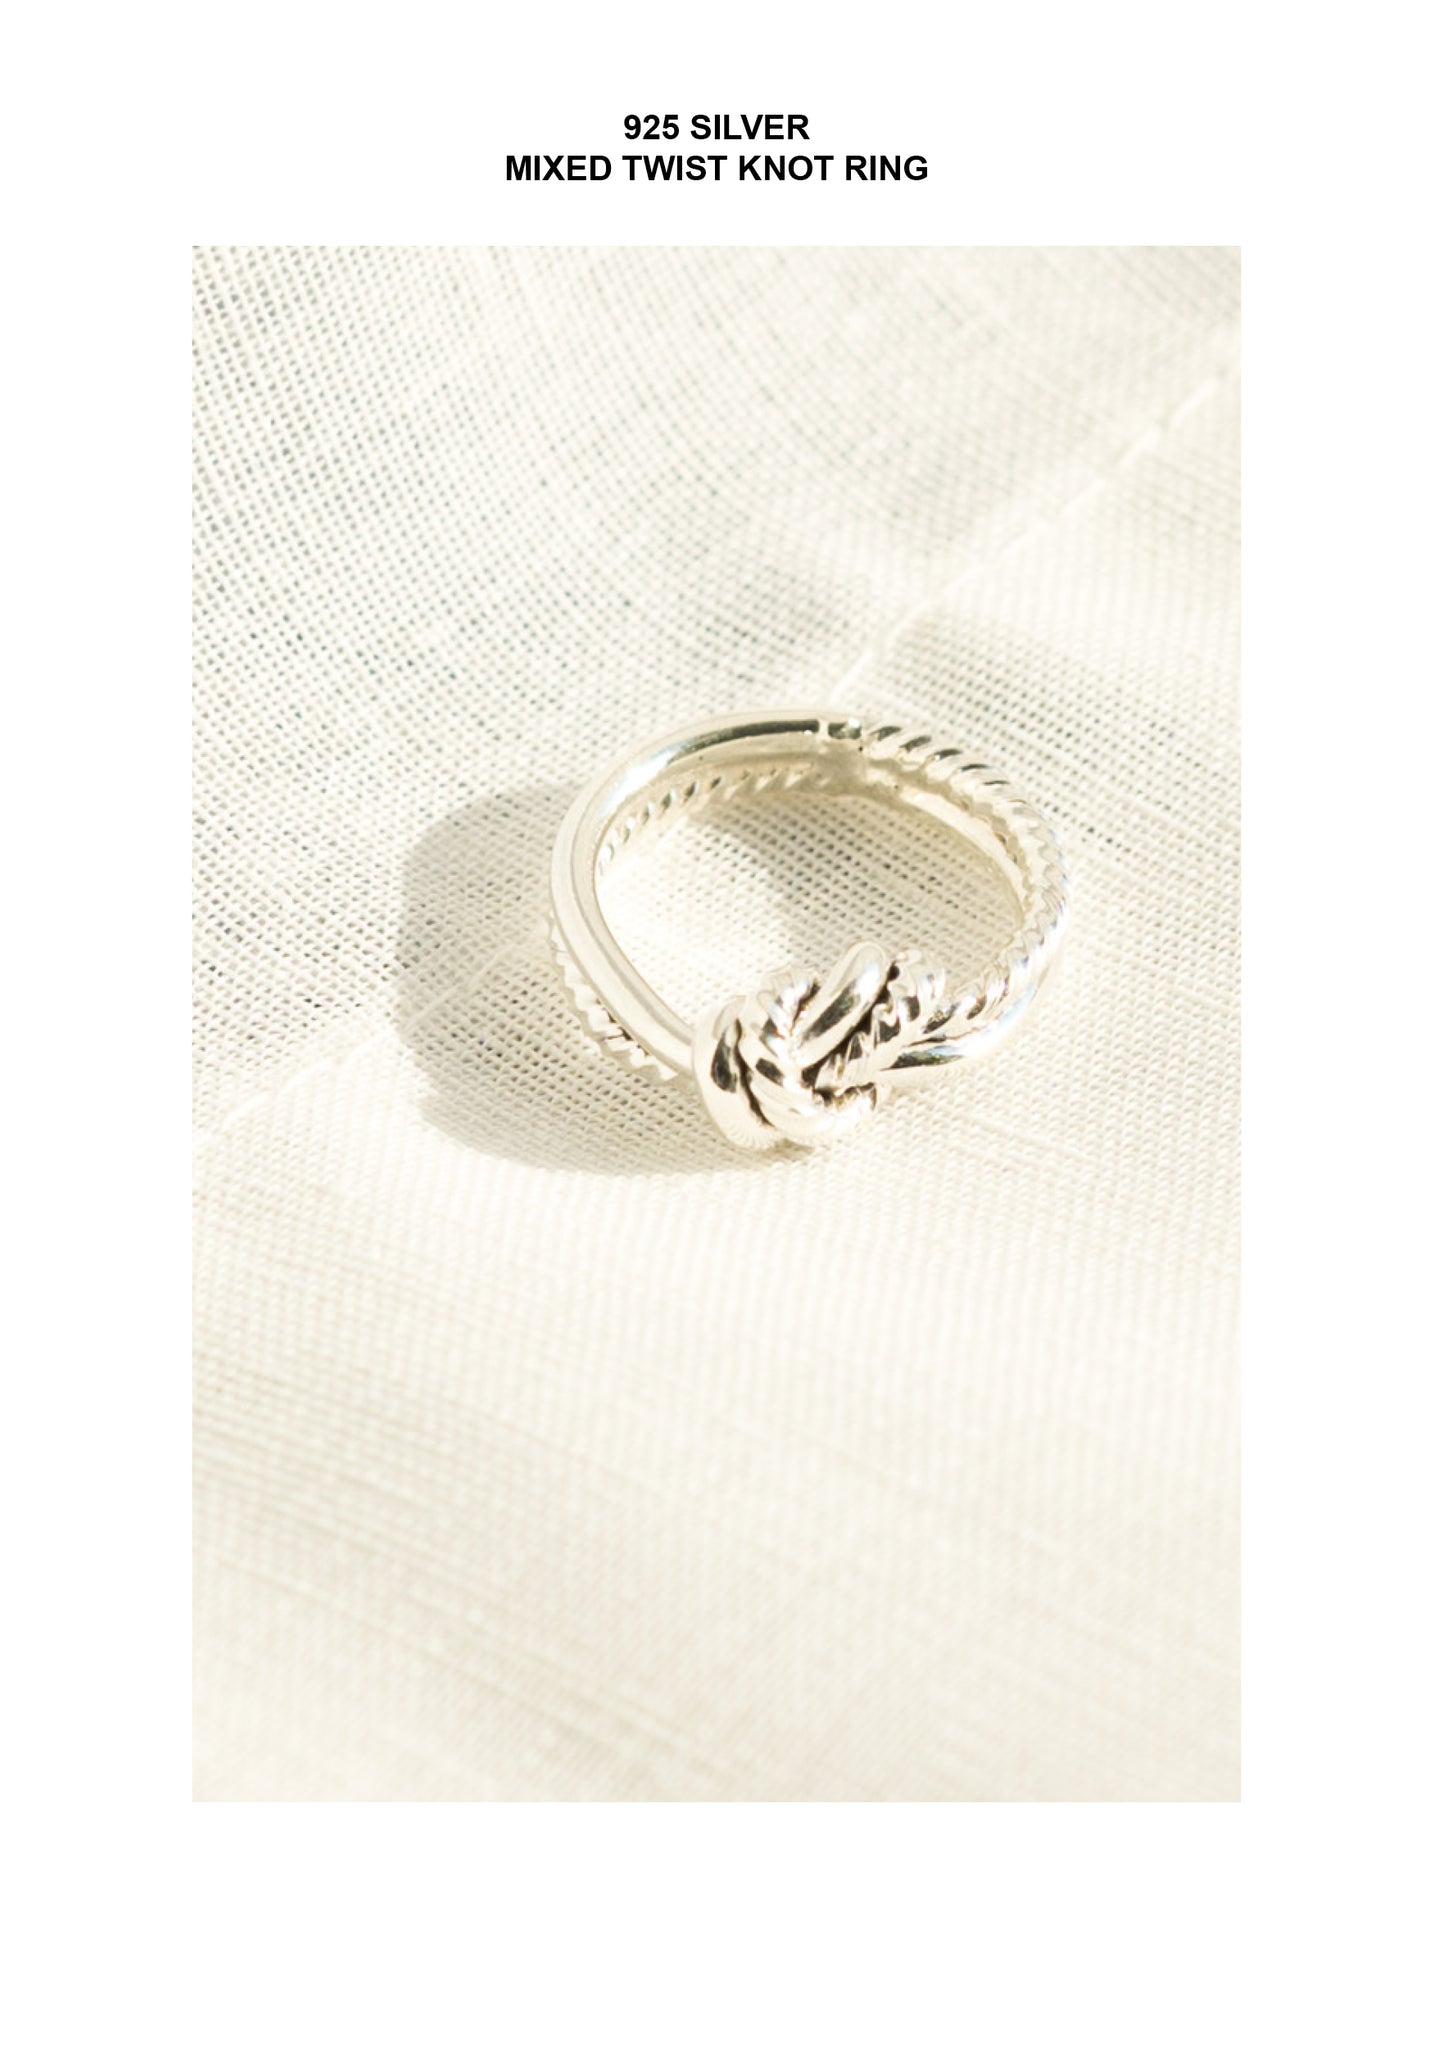 925 Silver Mixed Twist Knot Ring - whoami